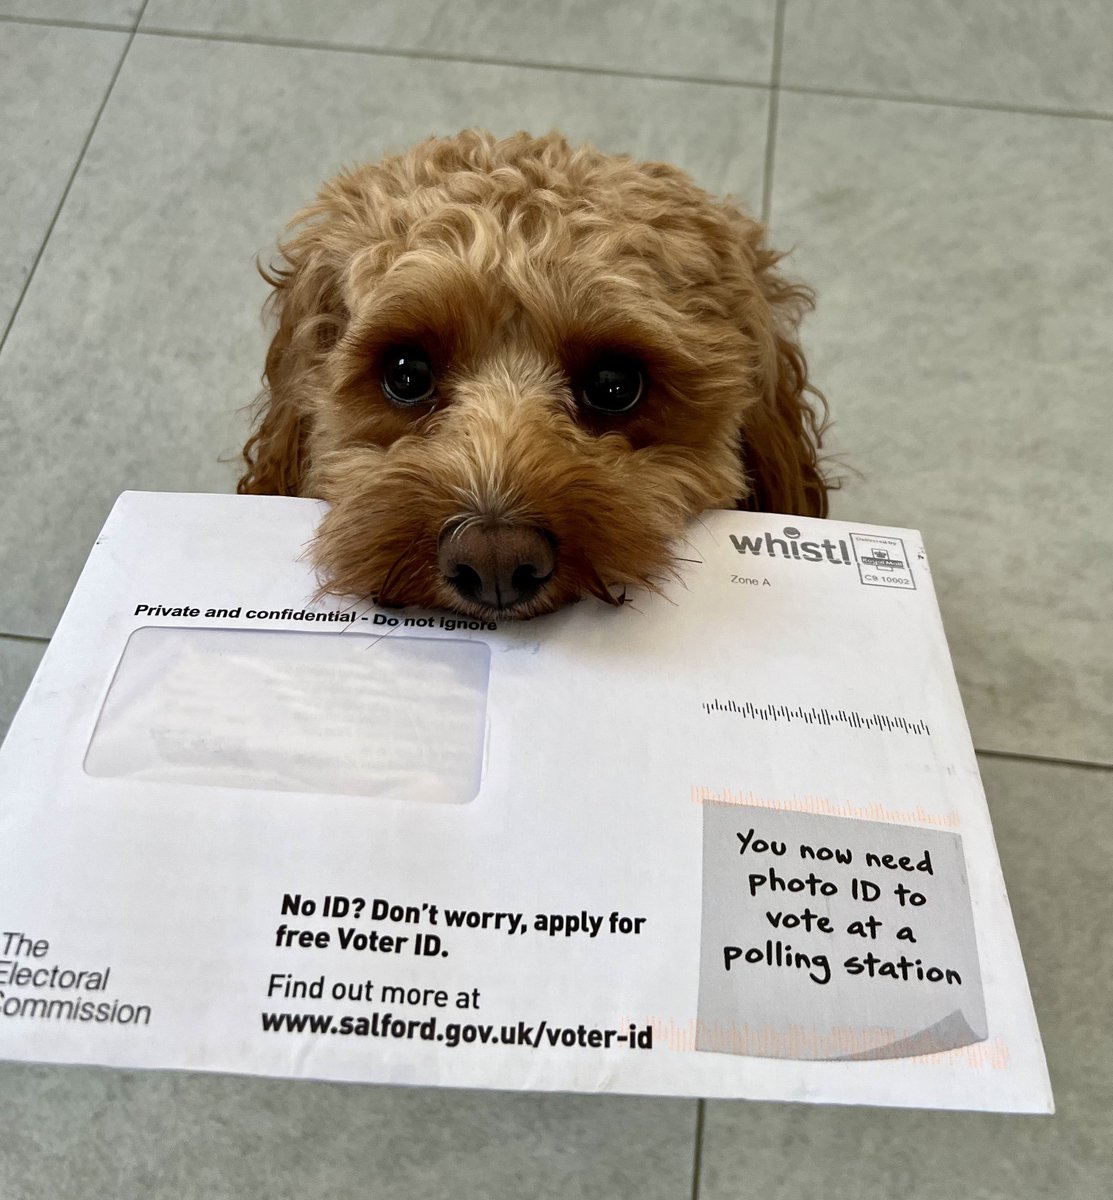 Meet Jasper. He knows that elections are how we shape tomorrow. He’s reminding his owner he needs photo ID when he votes. If you don’t have any, apply for a free voter authority certificate. Make your mark & make Jasper wag his tail with pride. More info on our website.